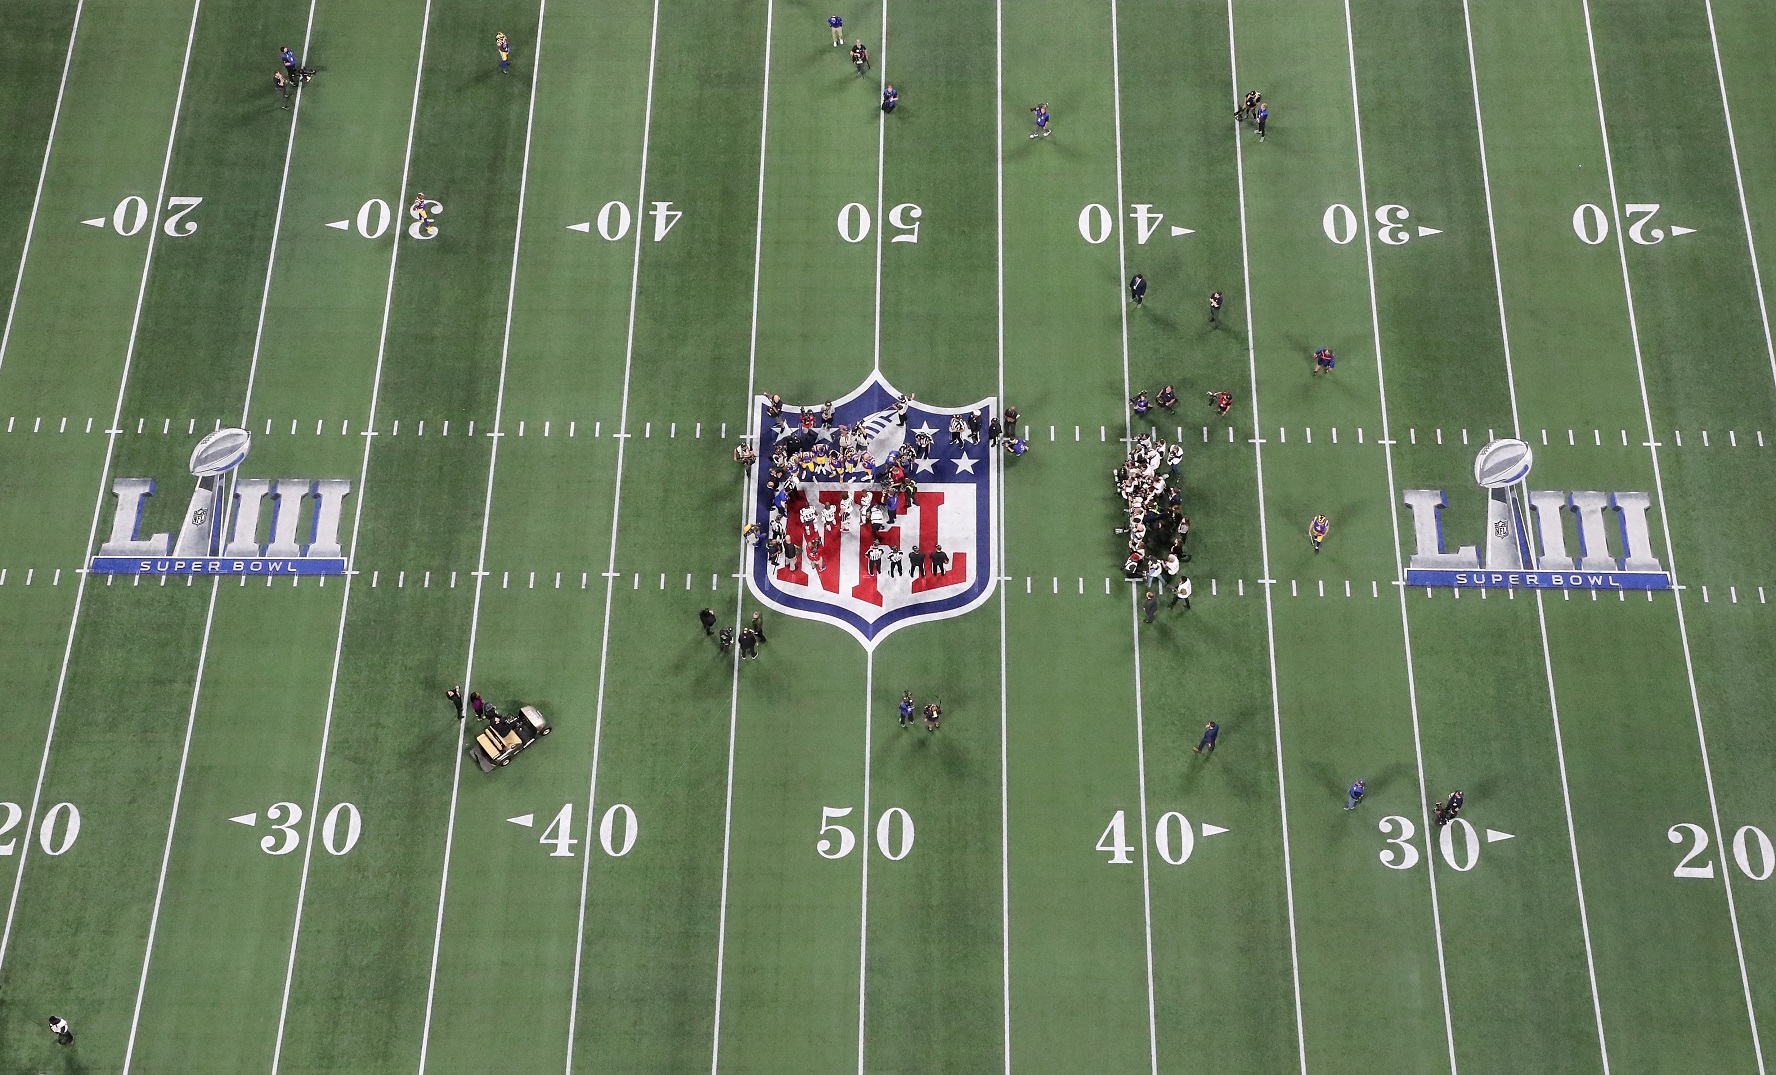 How Do Networks Show the First-Down Line on Televised Football Games?